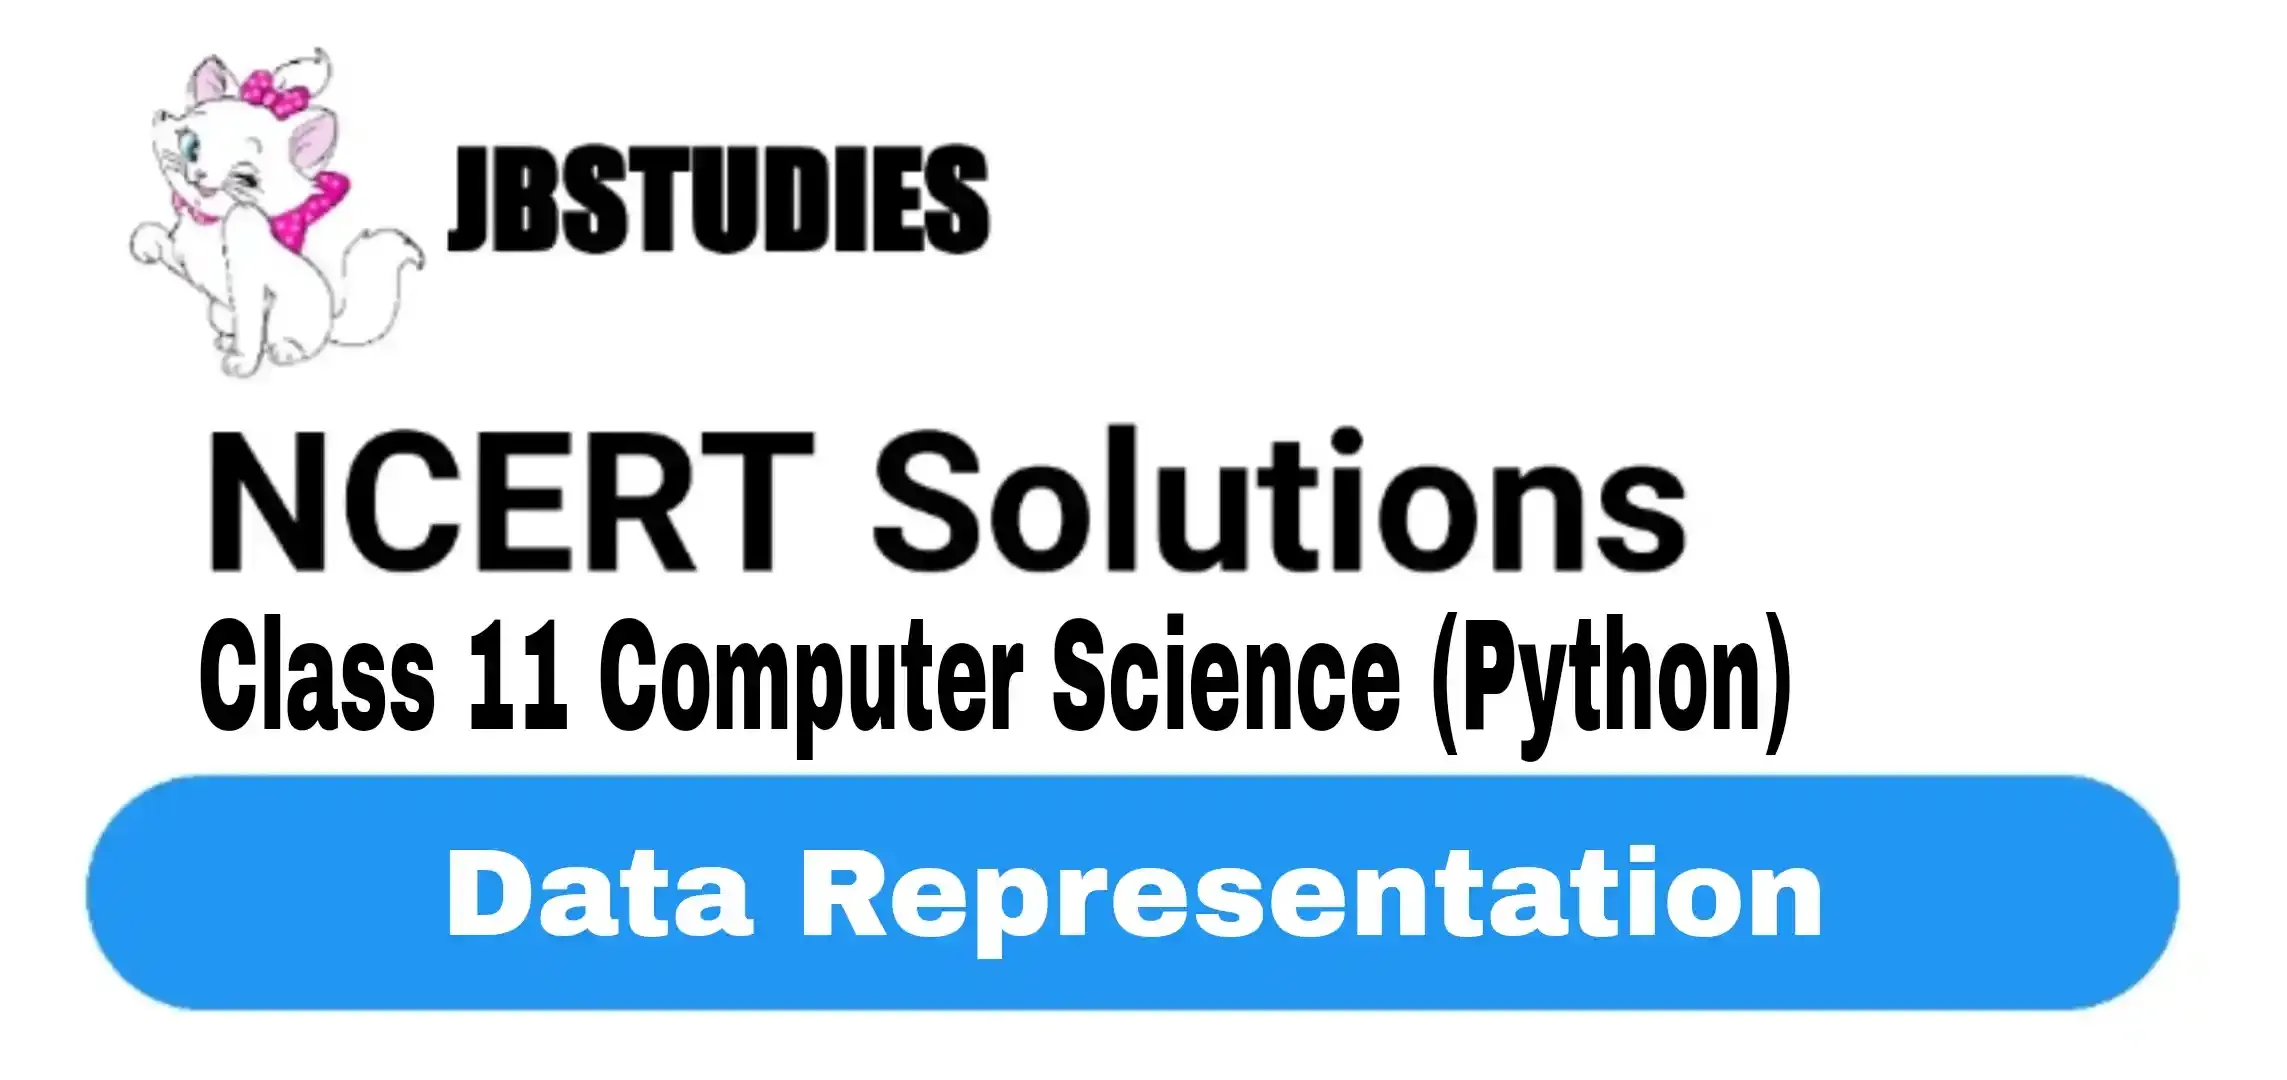 Solutions Class 11 Computer Science (Python) Chapter-3 (Data Representation)